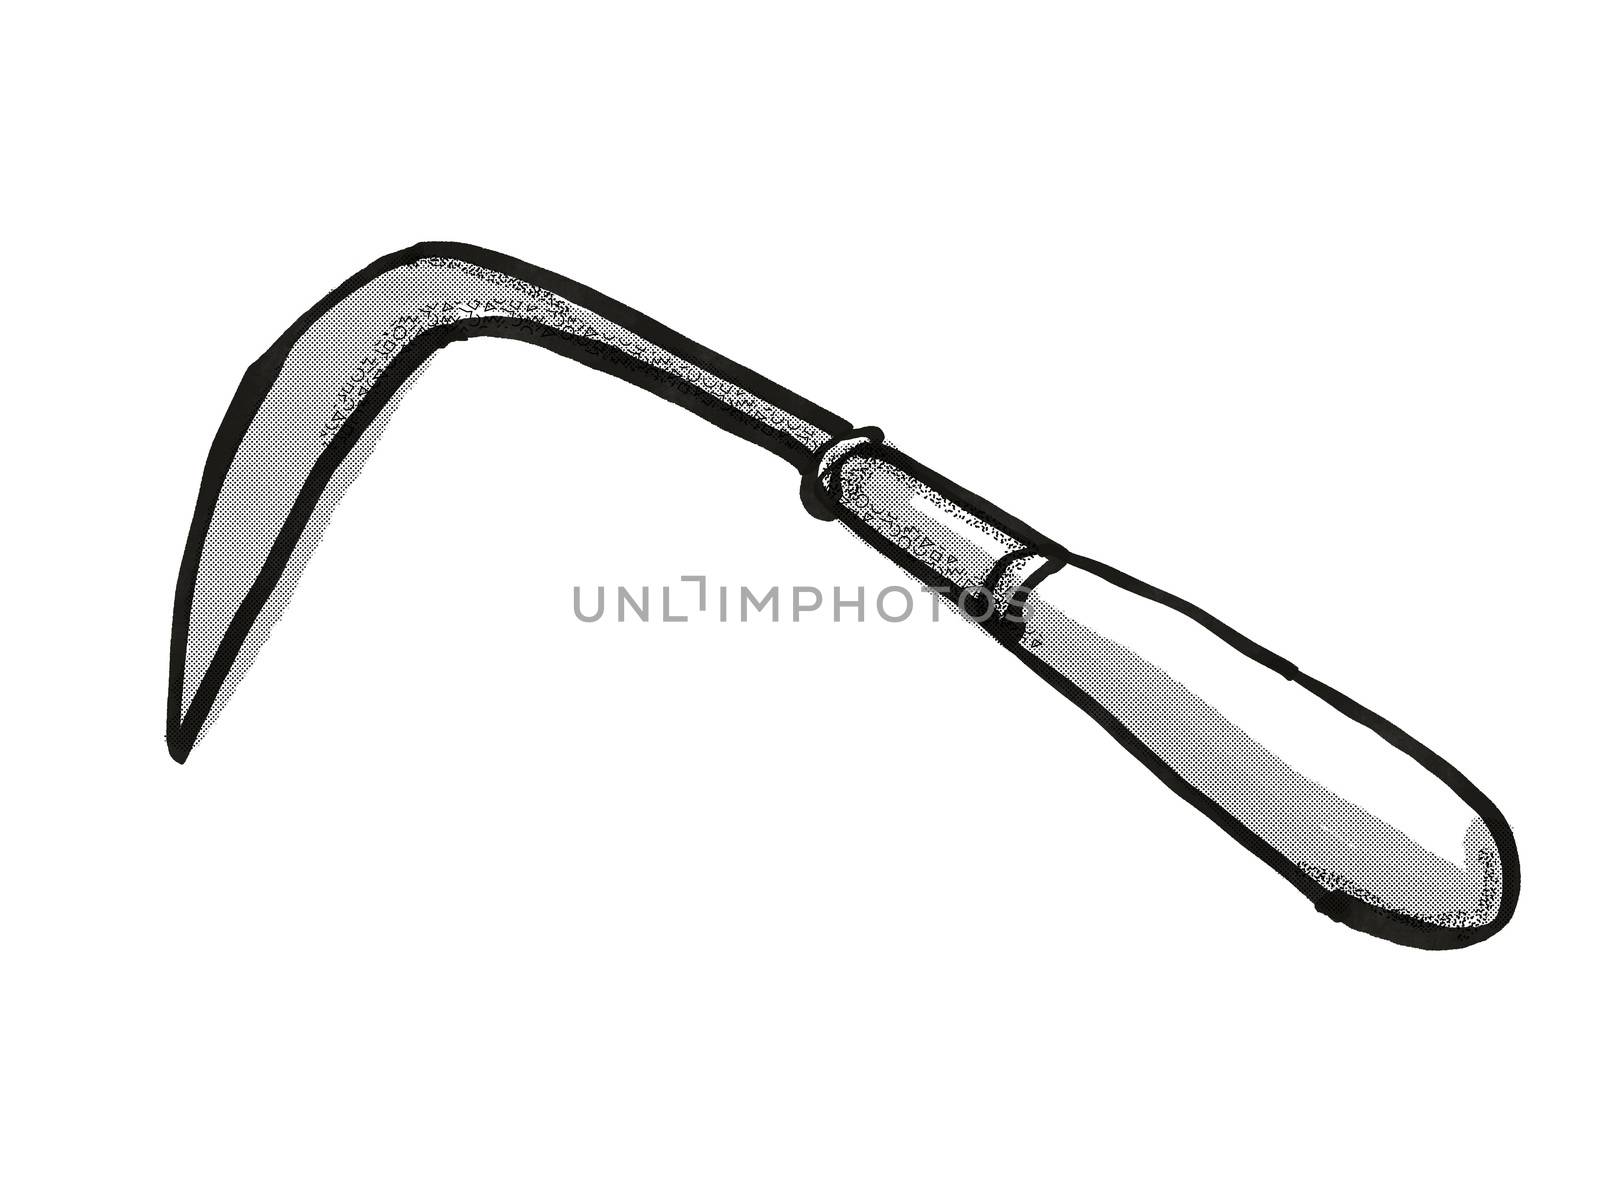 Retro cartoon style drawing of a crevice weeder , a garden or gardening tool equipment on isolated white background done in black and white